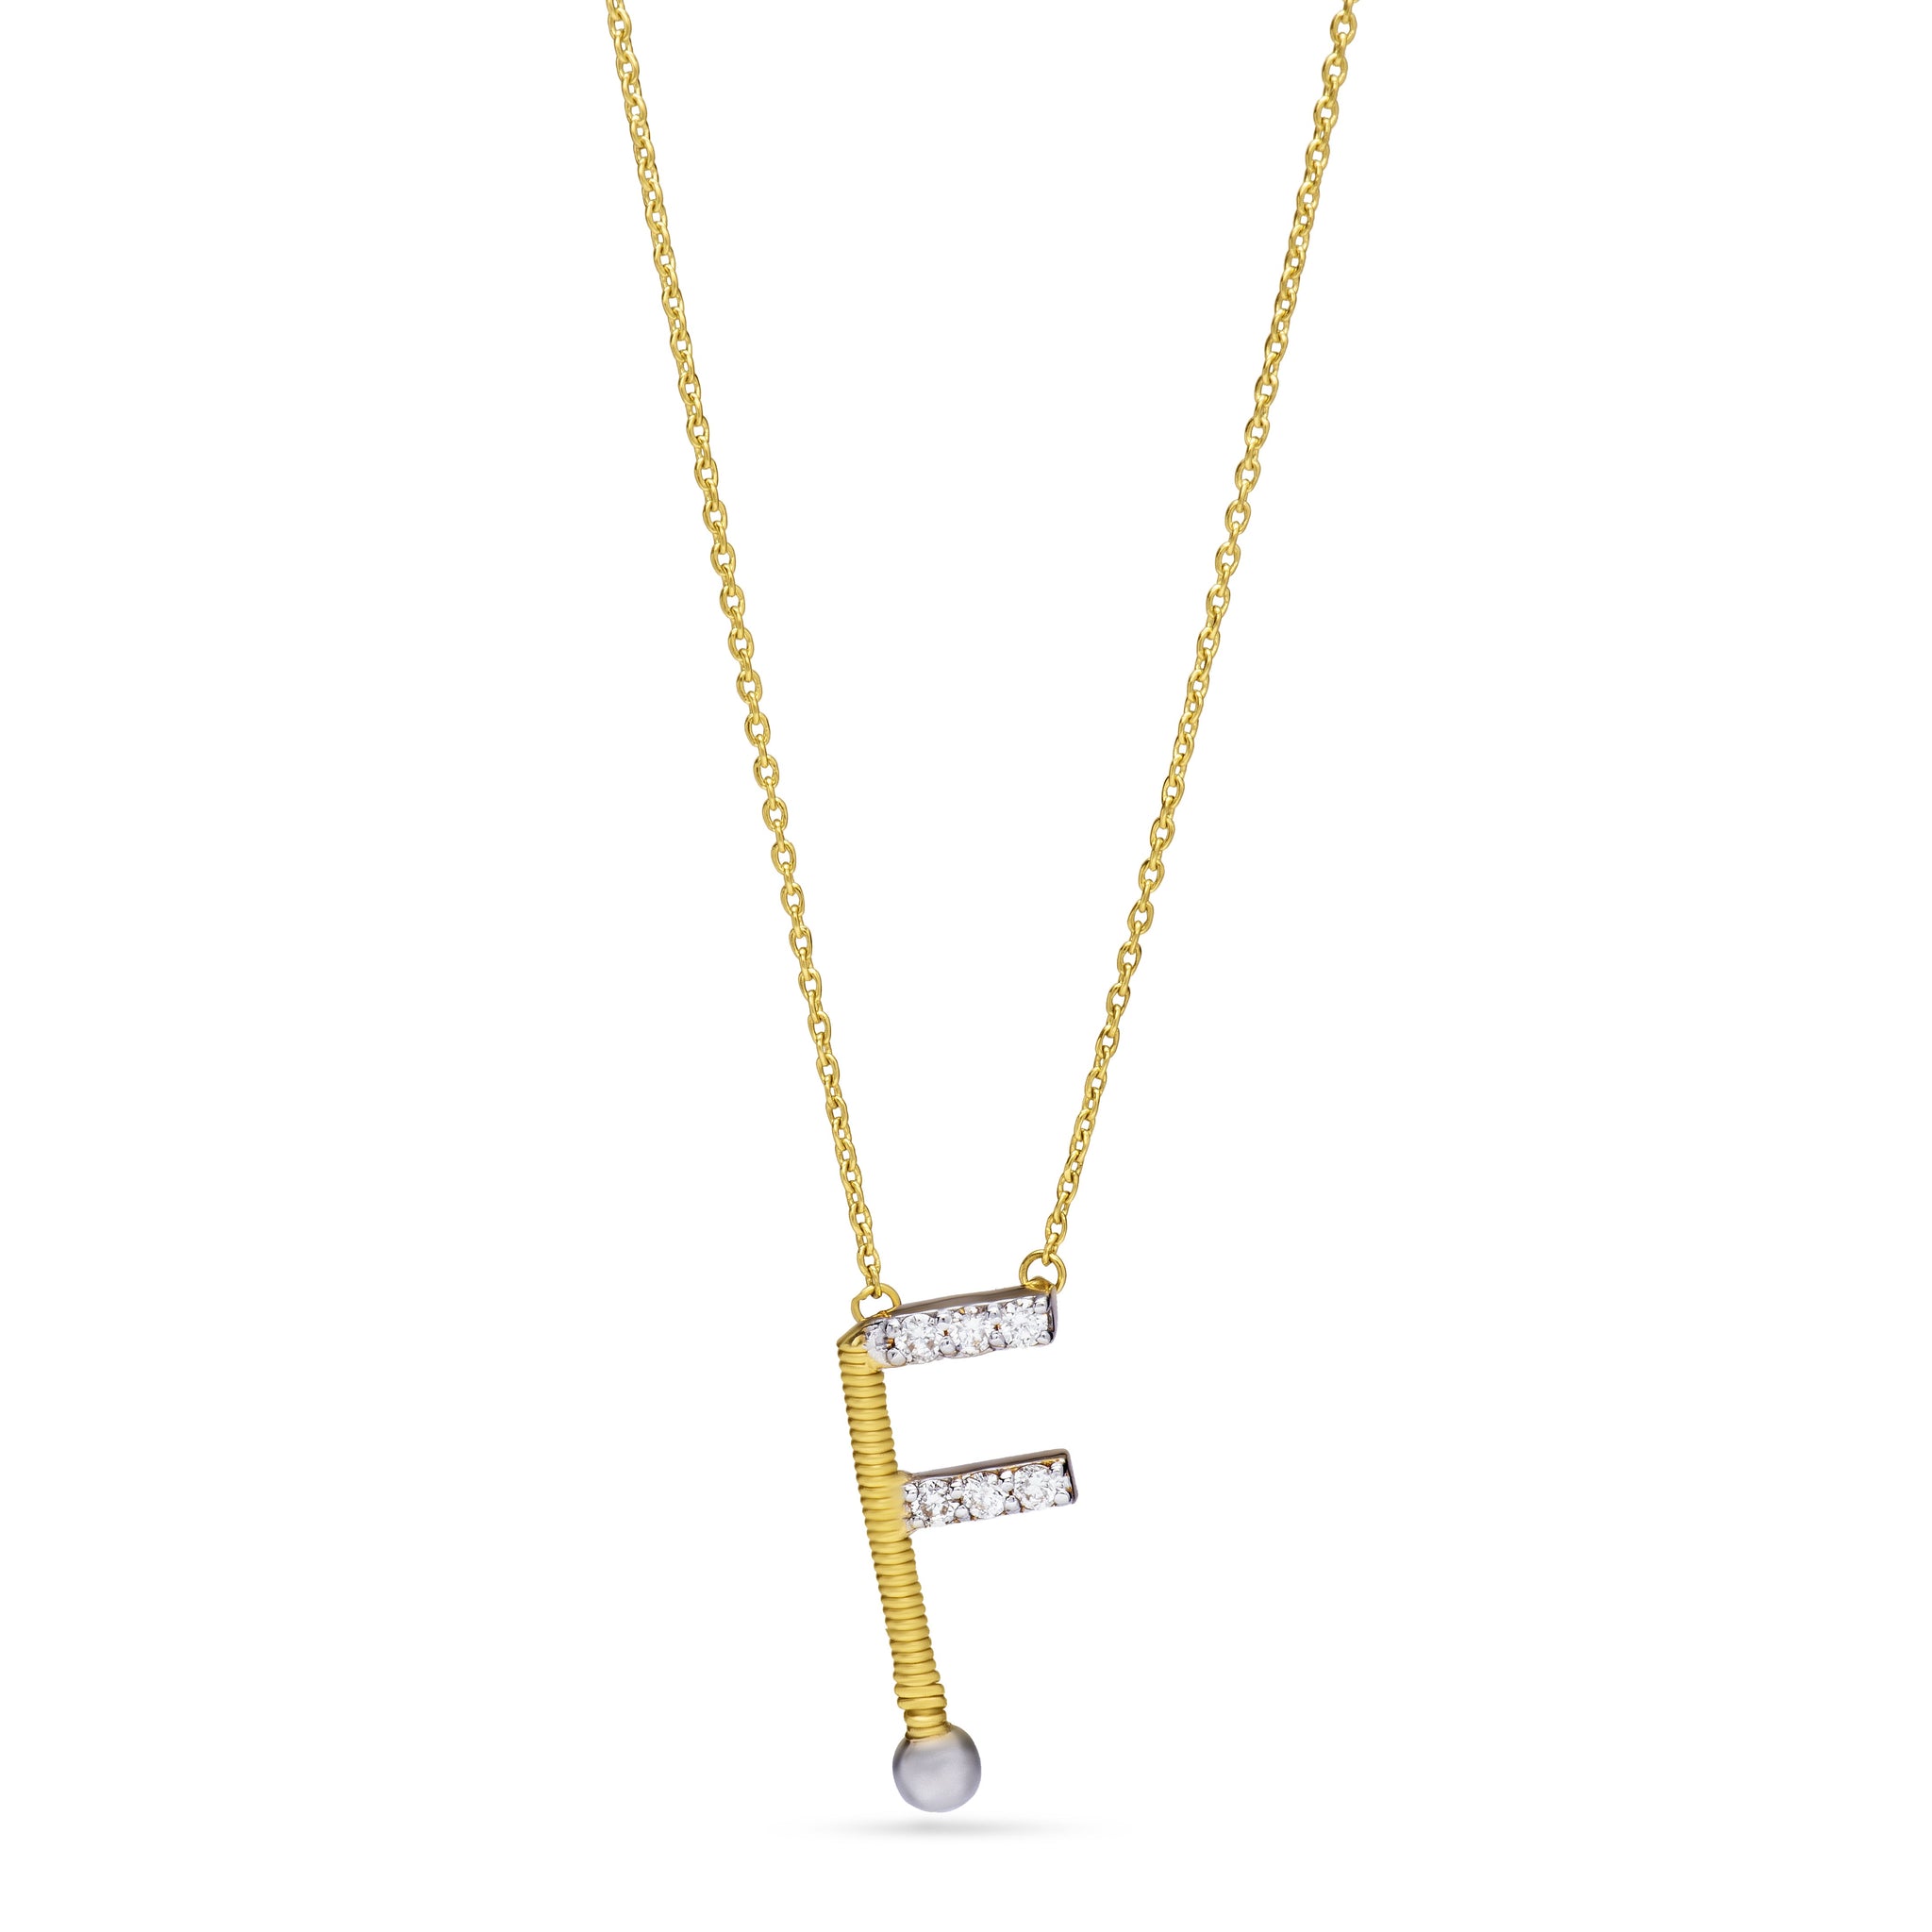 Letter F outstanding Diamond Necklace in Rose 18K Gold - NB0212 &  Weight of 2.27